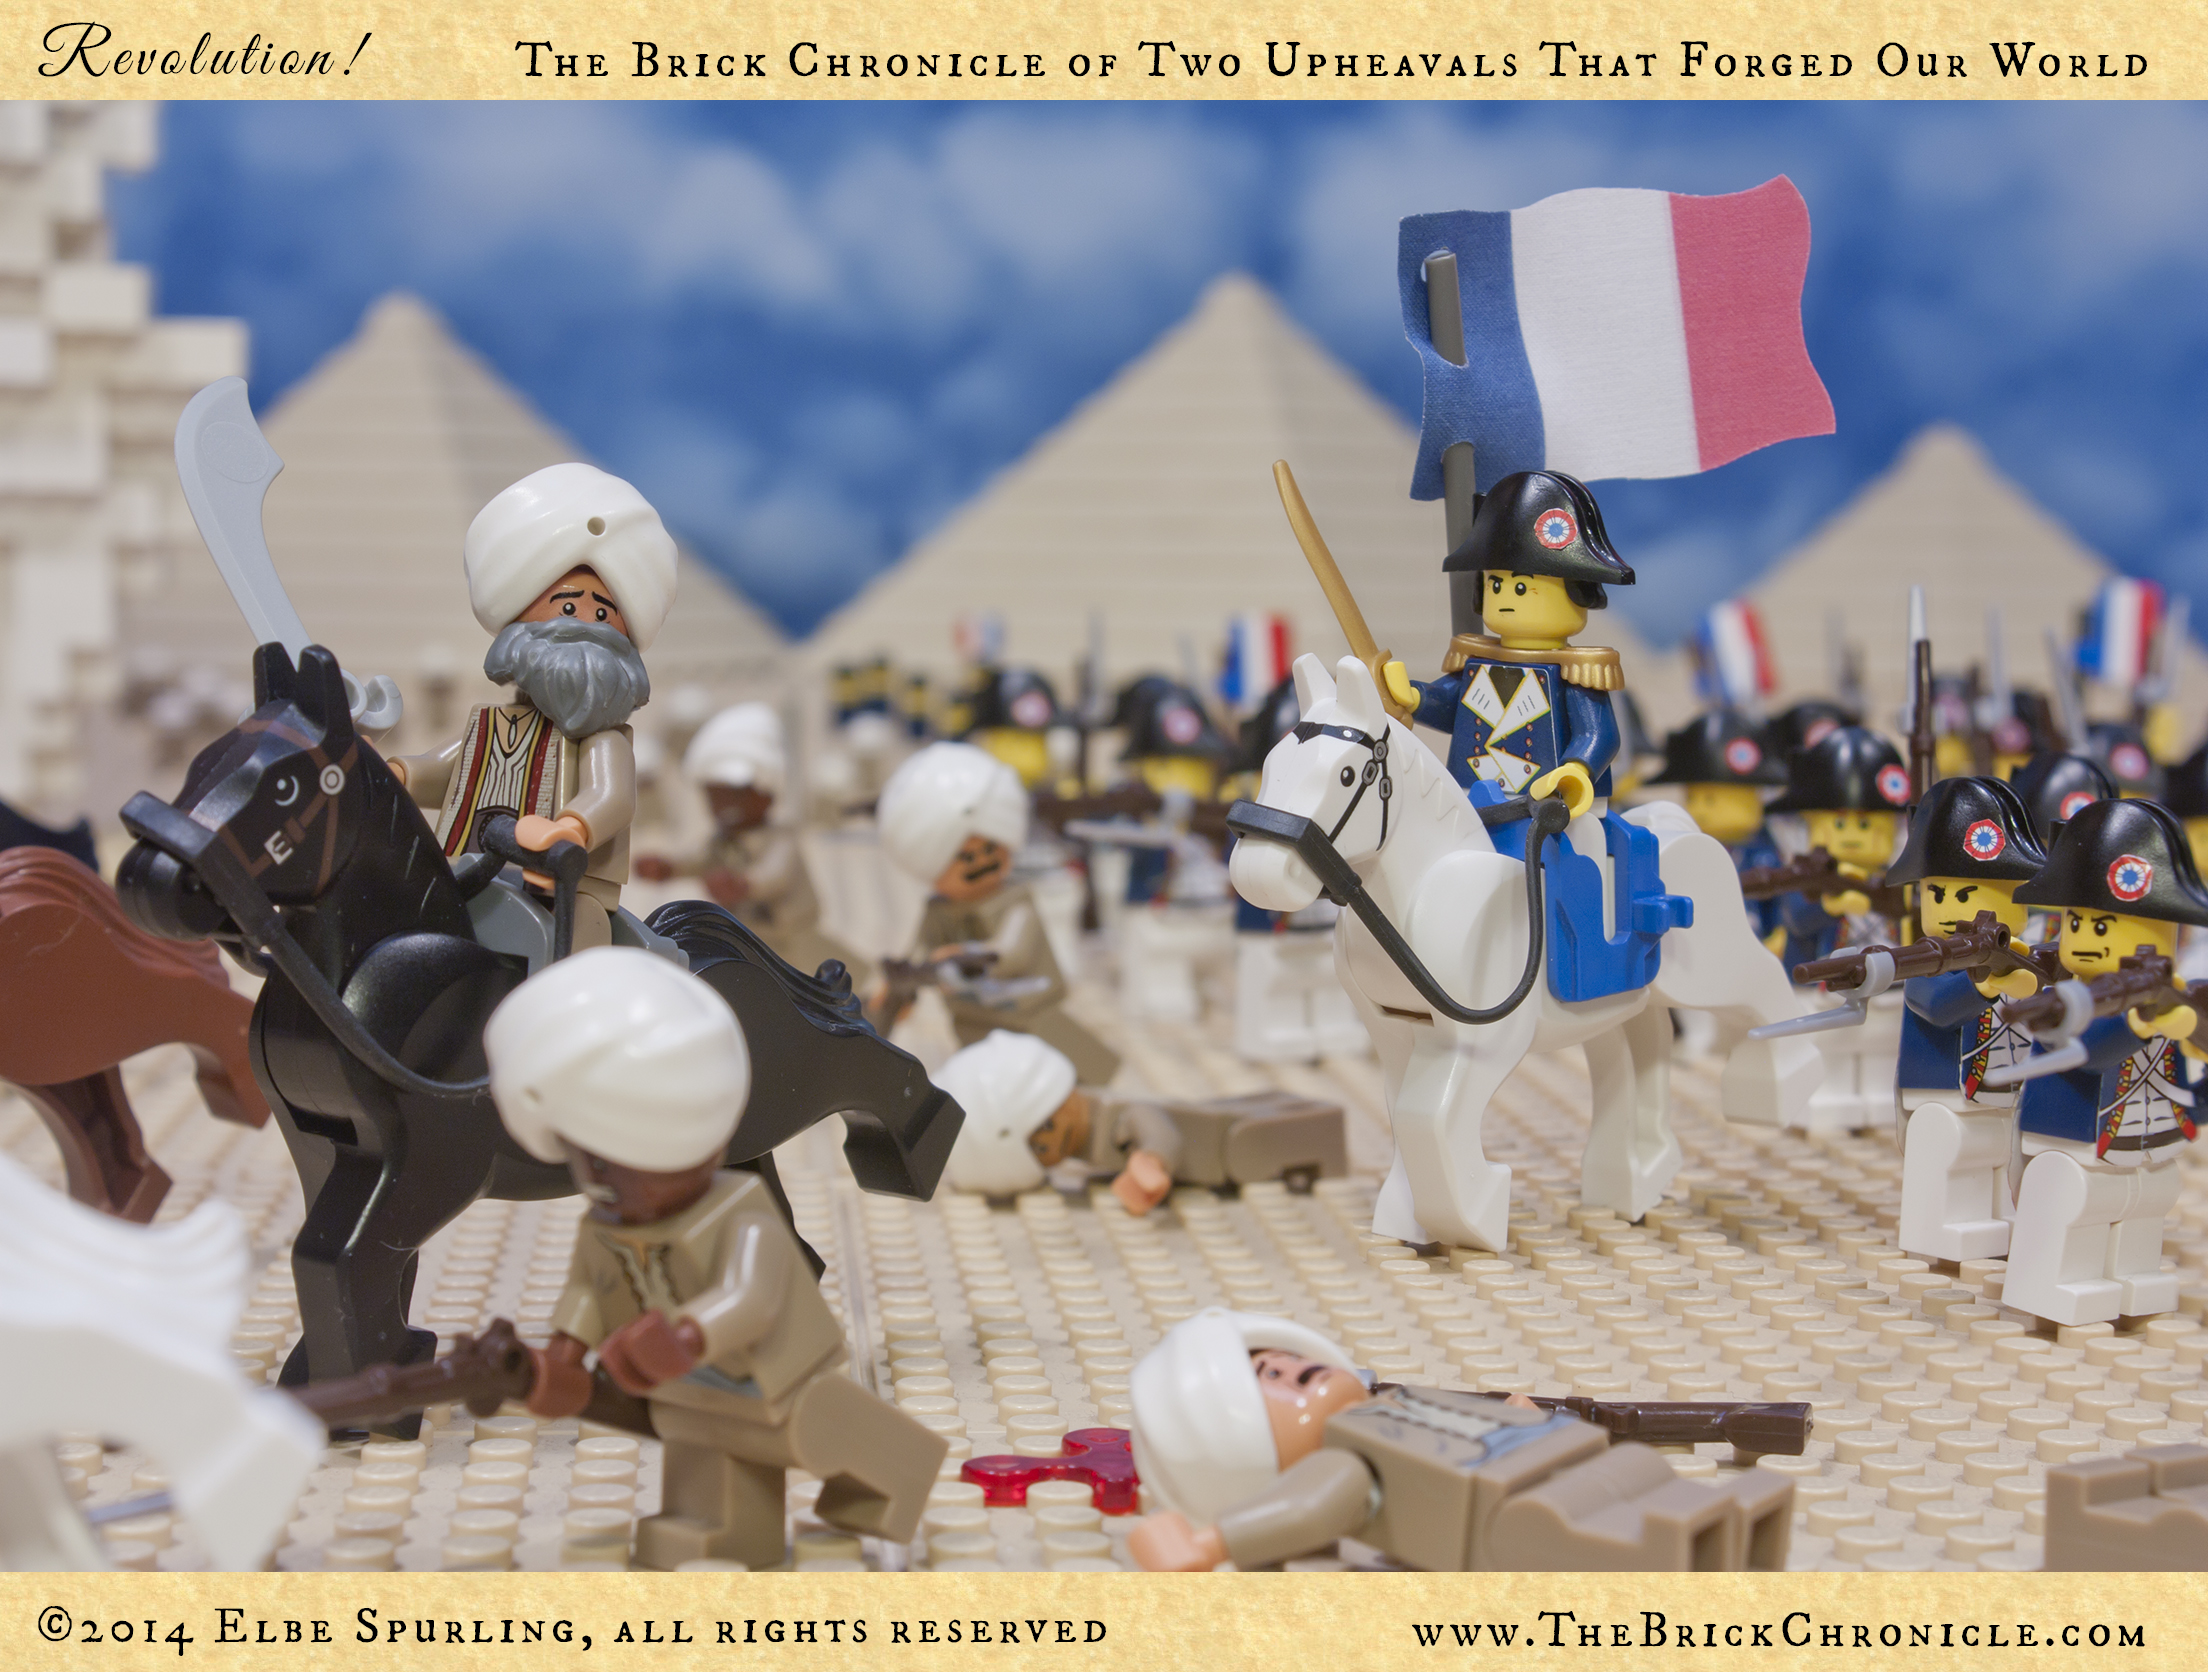 Napoleon followed up his triumph in Paris by leading the French army as it crossed the Alps, and he conquered Lombardy, the Papal States, and Venice. Fresh victories brought optimism and a sense of honor to the long-suffering people of France. Looted treasures from defeated cities filled the treasuries of the government, which at the end of 1795 had composed a new constitution and reorganized itself with a bicameral legislative body and a Directory of five men as its executive branch. Without consulting this Directory, Napoleon took it upon himself to negotiate a peace treaty with Austria. He then lead a French army on an expedition into Egypt to counter British influence, and there he won a decisive victory over of the armies of the Mamluk rulers of Egypt at the Battle of the Pyramids.